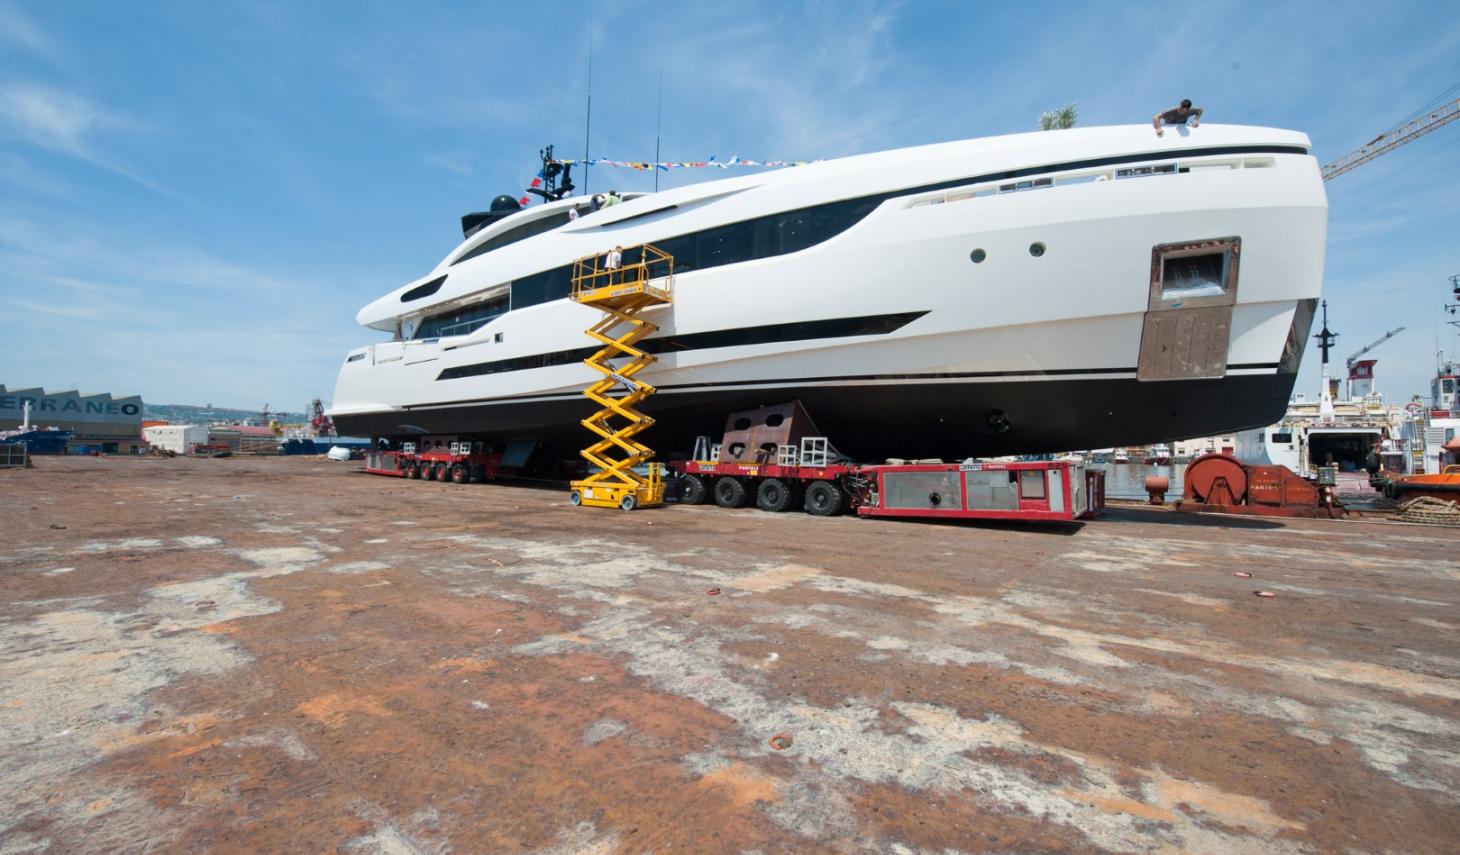 40m Culumbus Superyacht By Palumbo At Launch